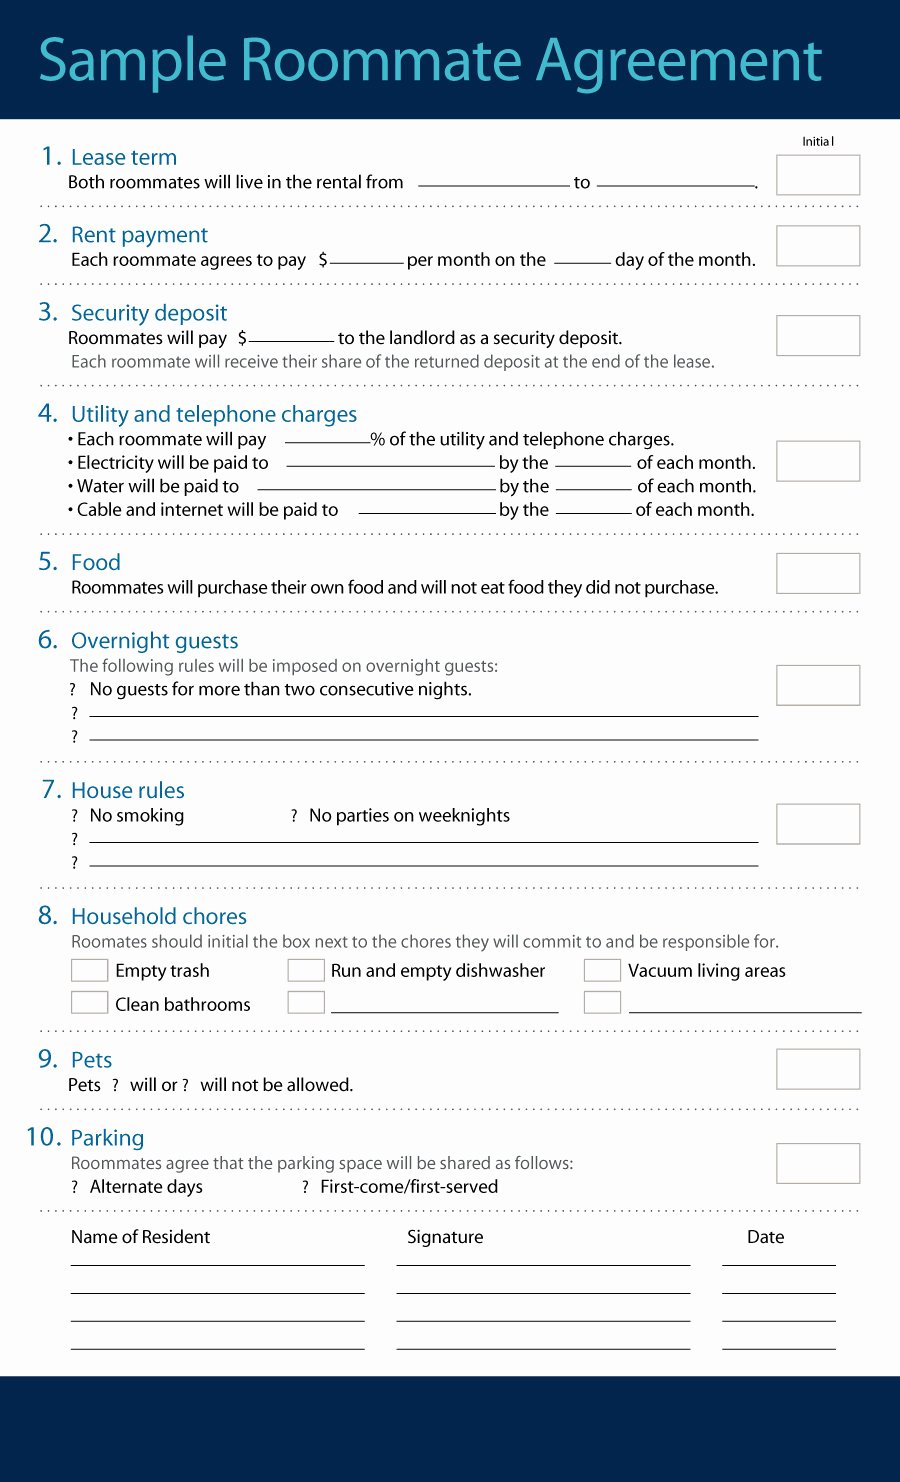 Funny Roommate Agreement Luxury 40 Free Roommate Agreement Templates &amp; forms Word Pdf